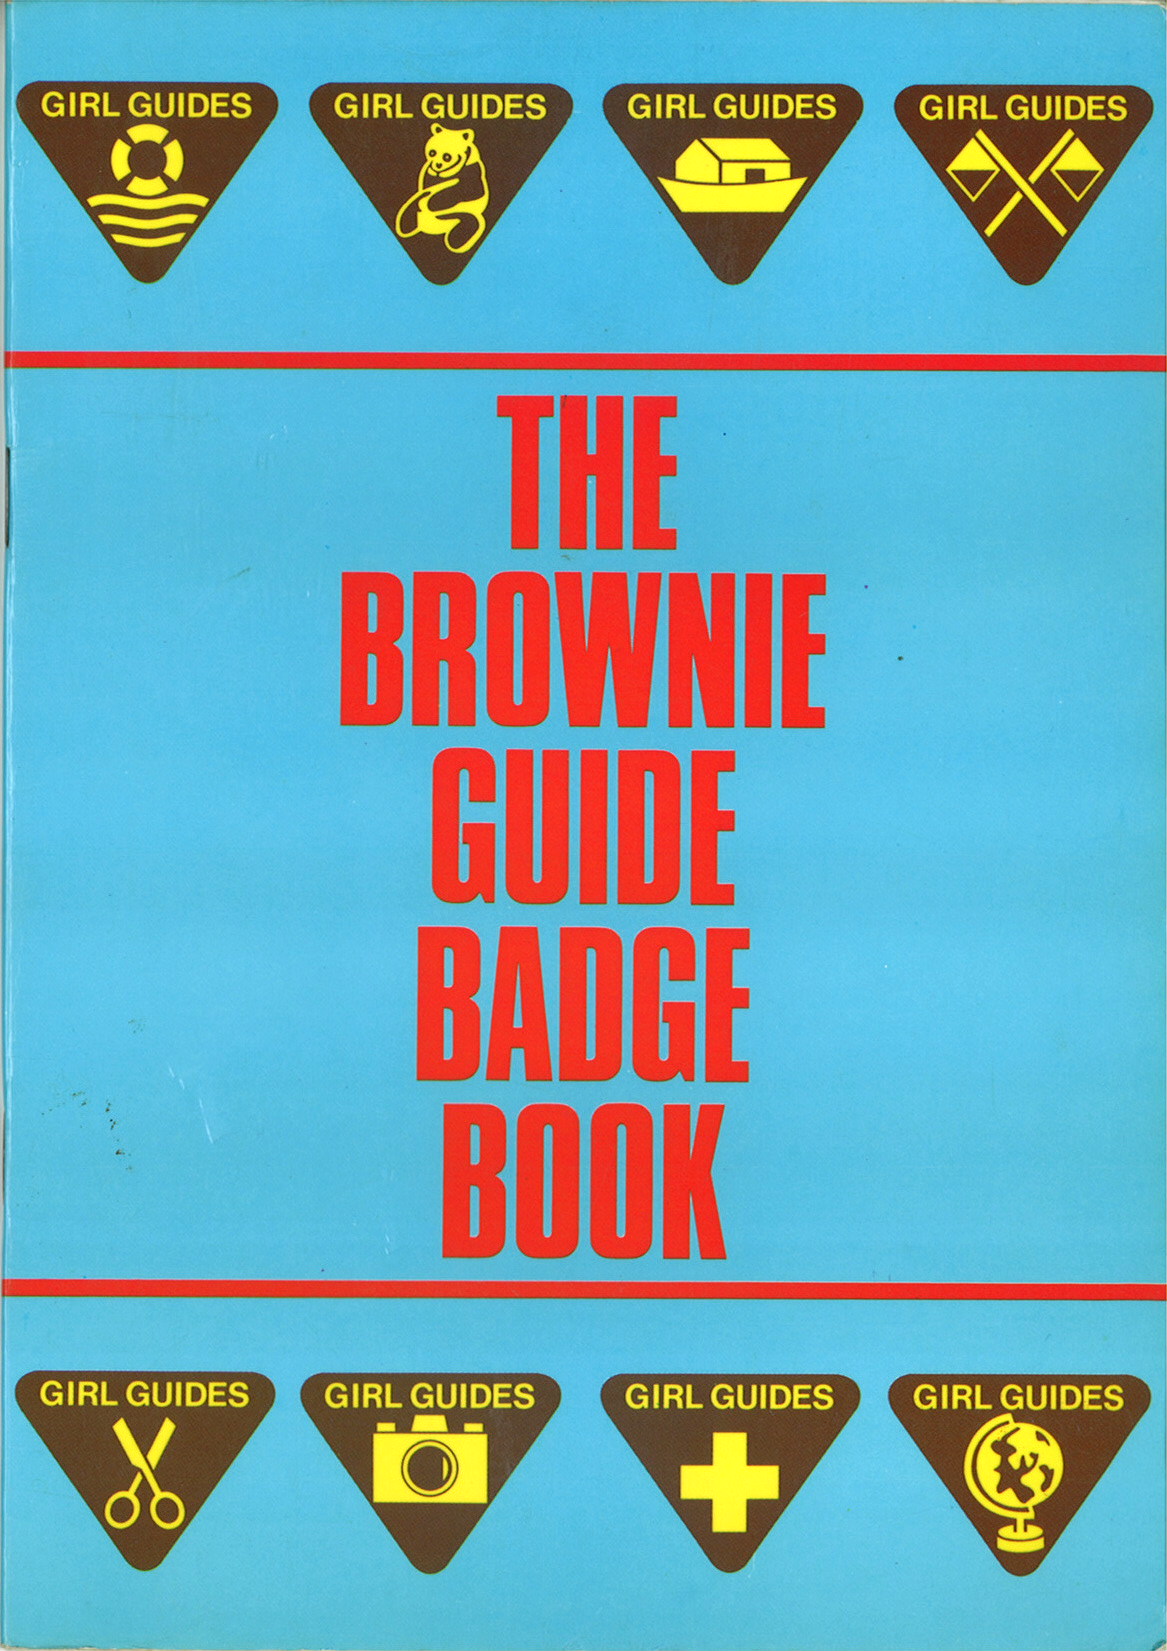 This 1987 badge book told girls what they needed to do for each of the badges they could work on as a Brownie.